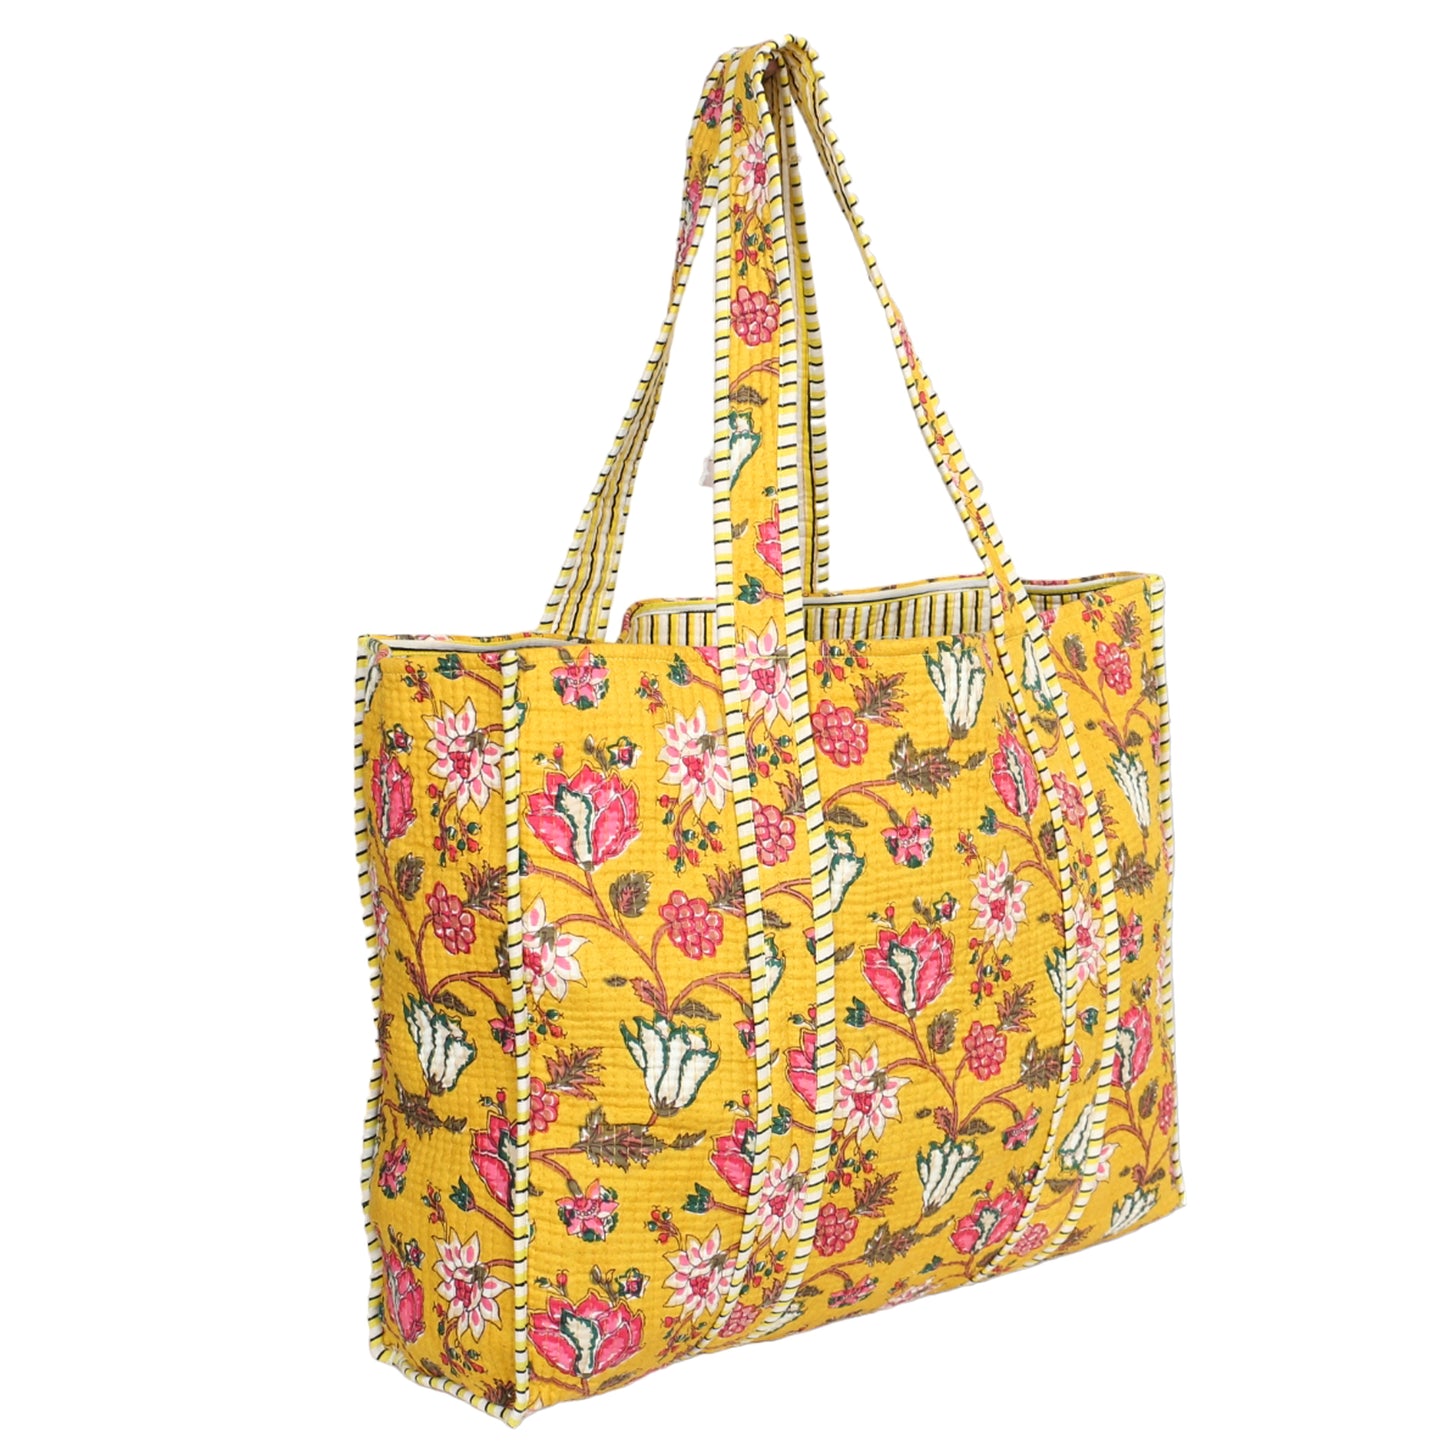 Handmade Quilted Tote Bag - Yellow and Pink